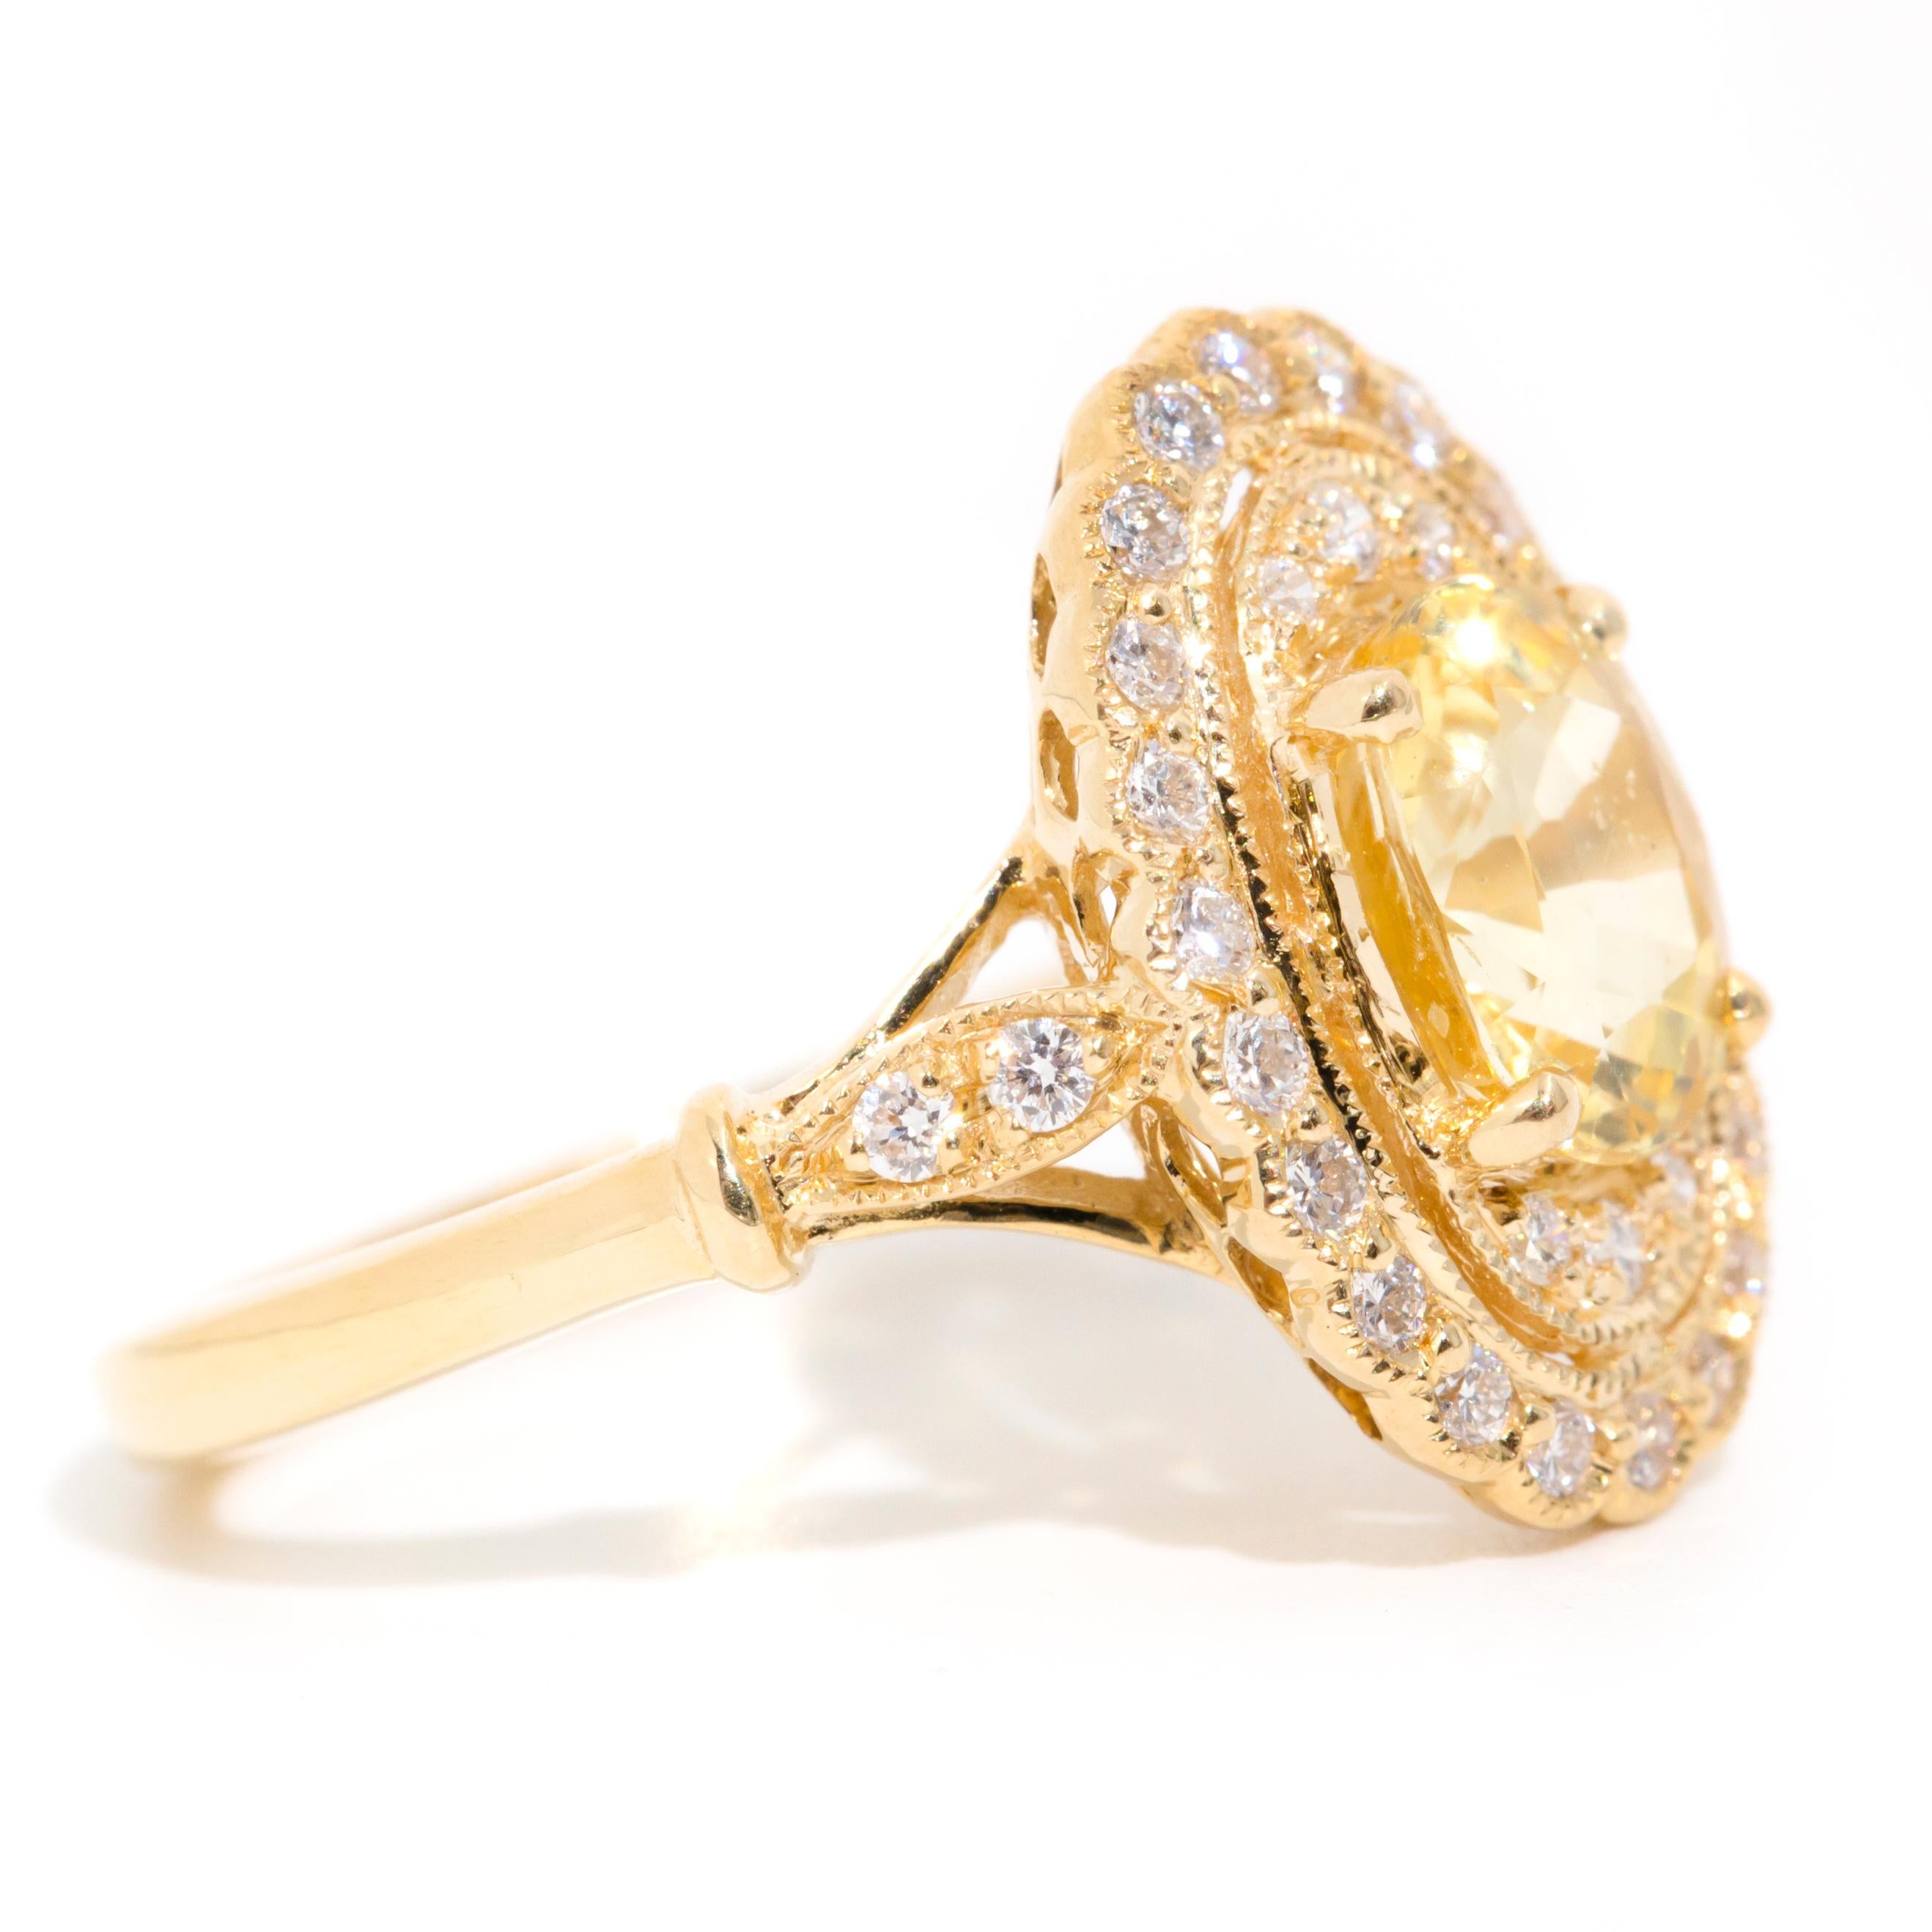 2.33 Carat Yellow Ceylon Sapphire and Diamond Halo Ring in 18 Carat Yellow Gold  For Sale 2